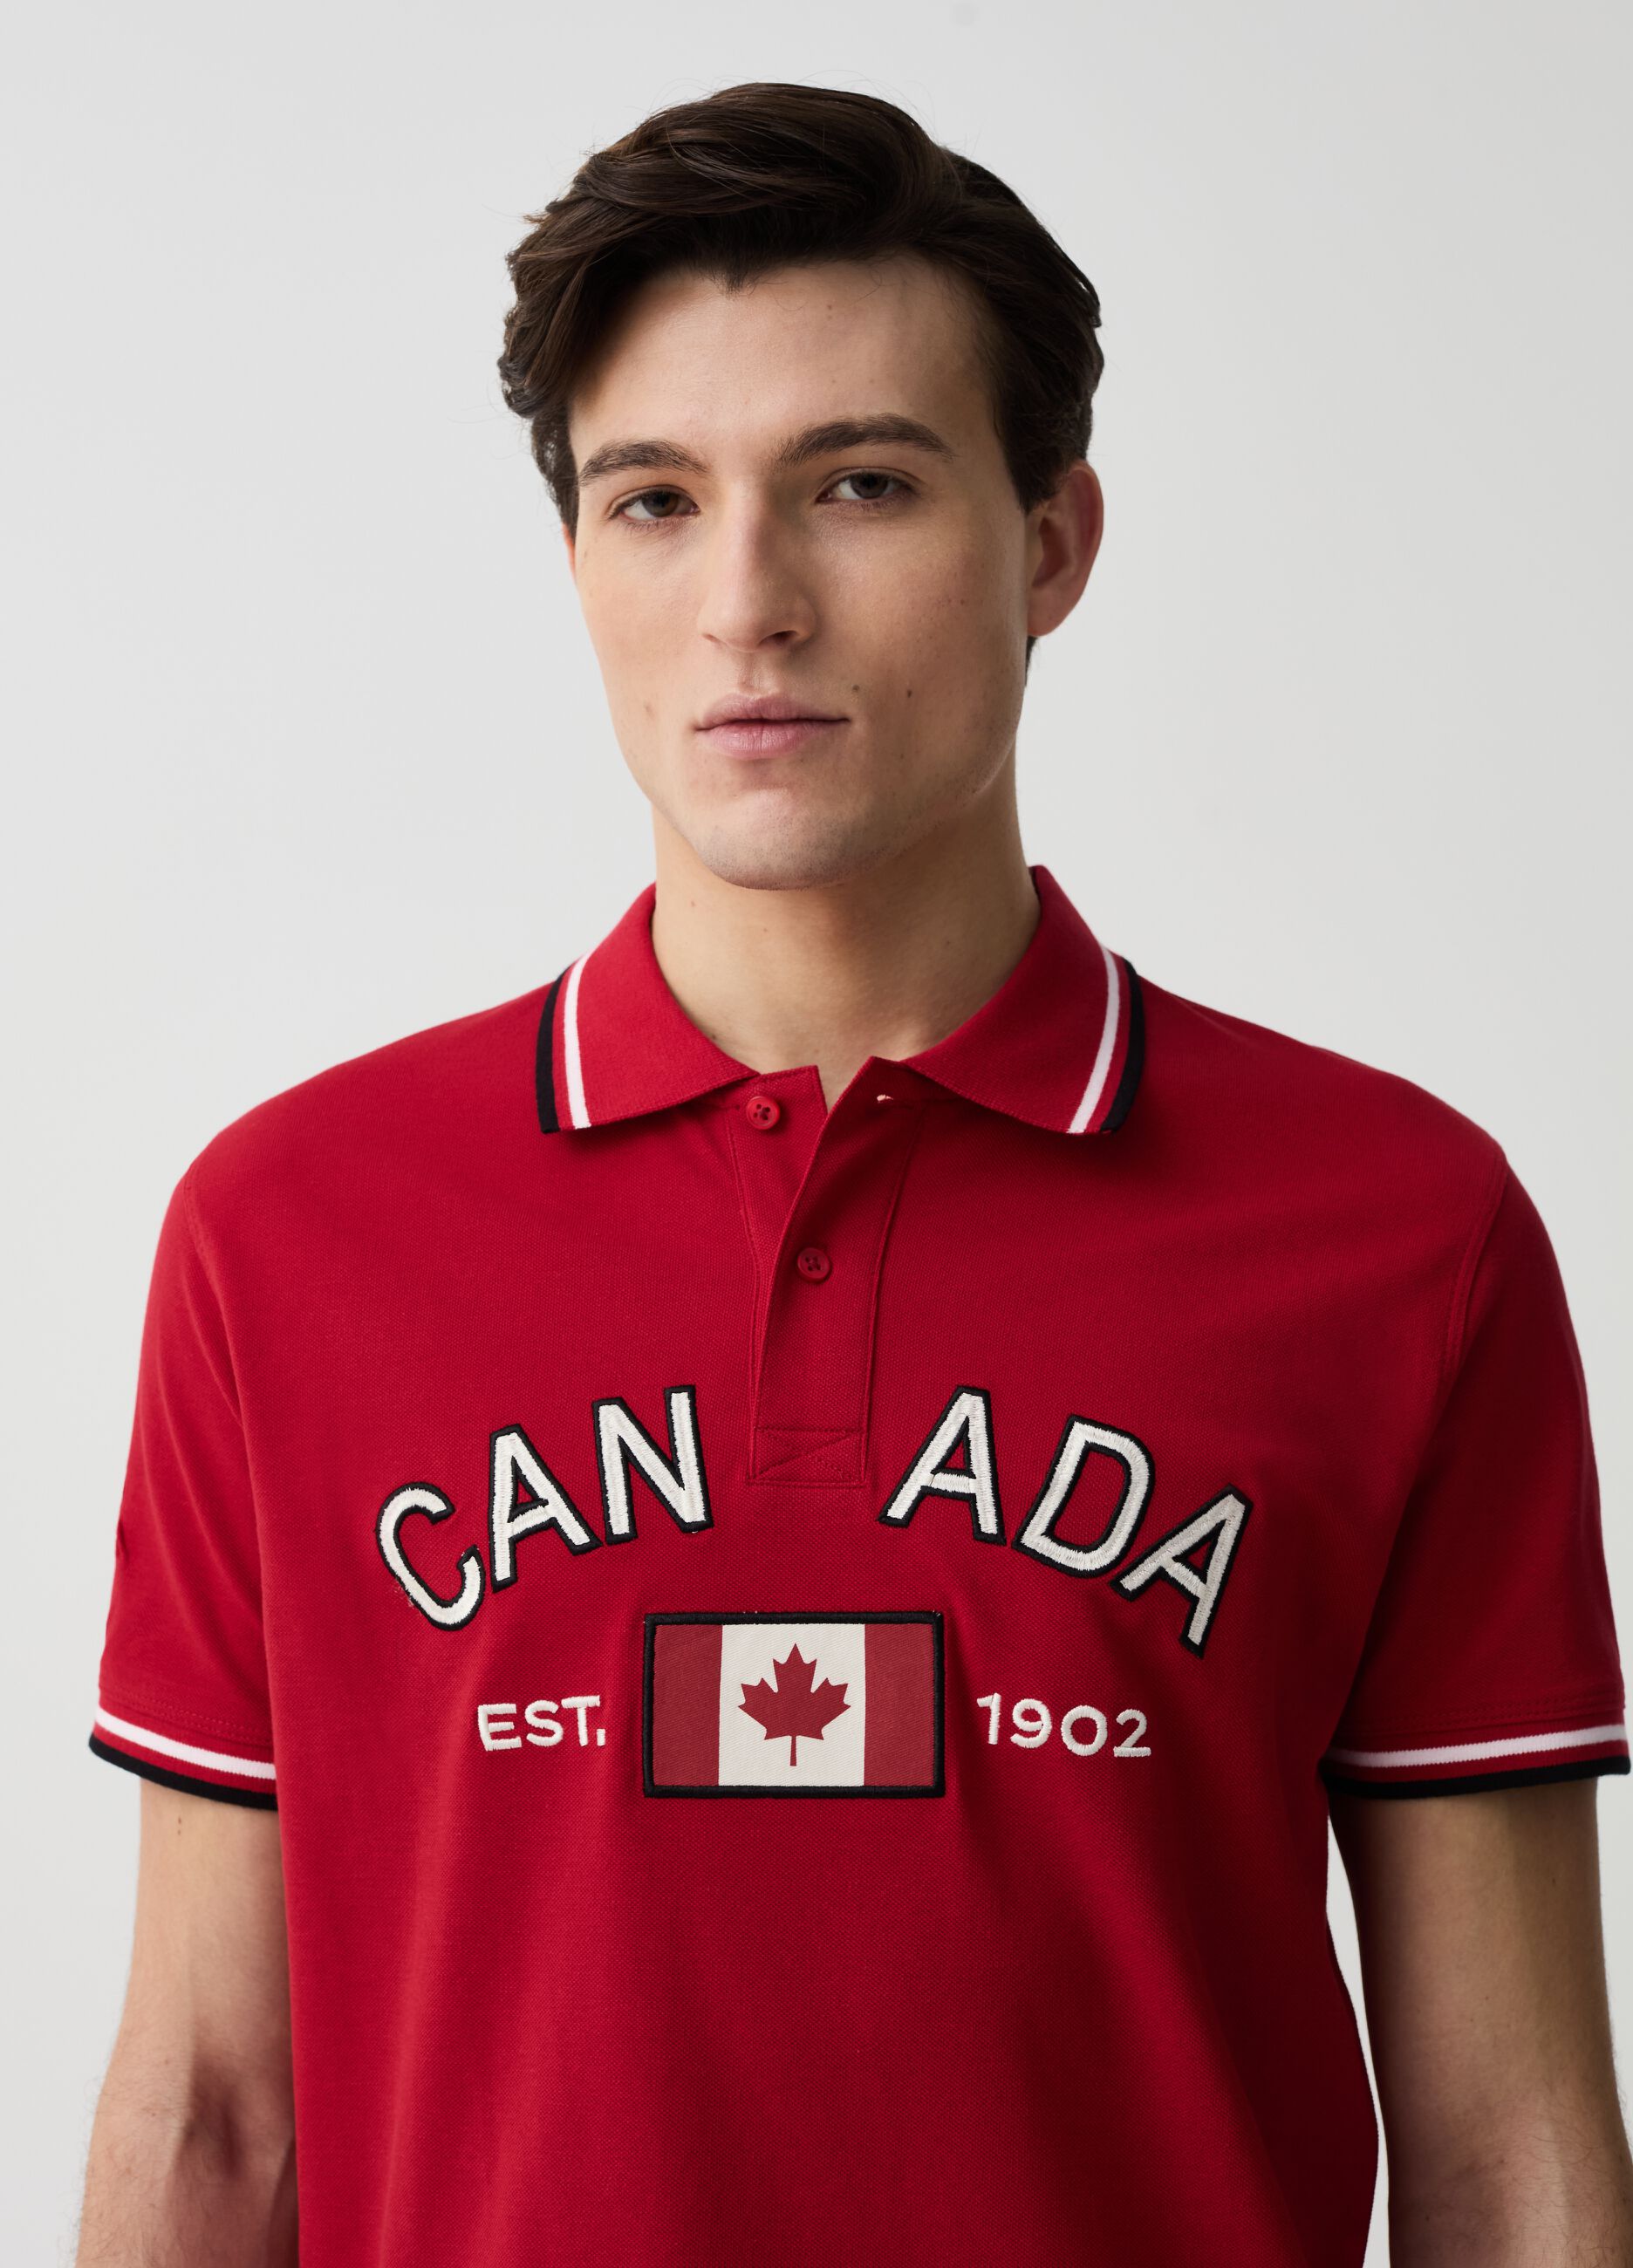 Polo shirt with striped edging and Canada Trail embroidery